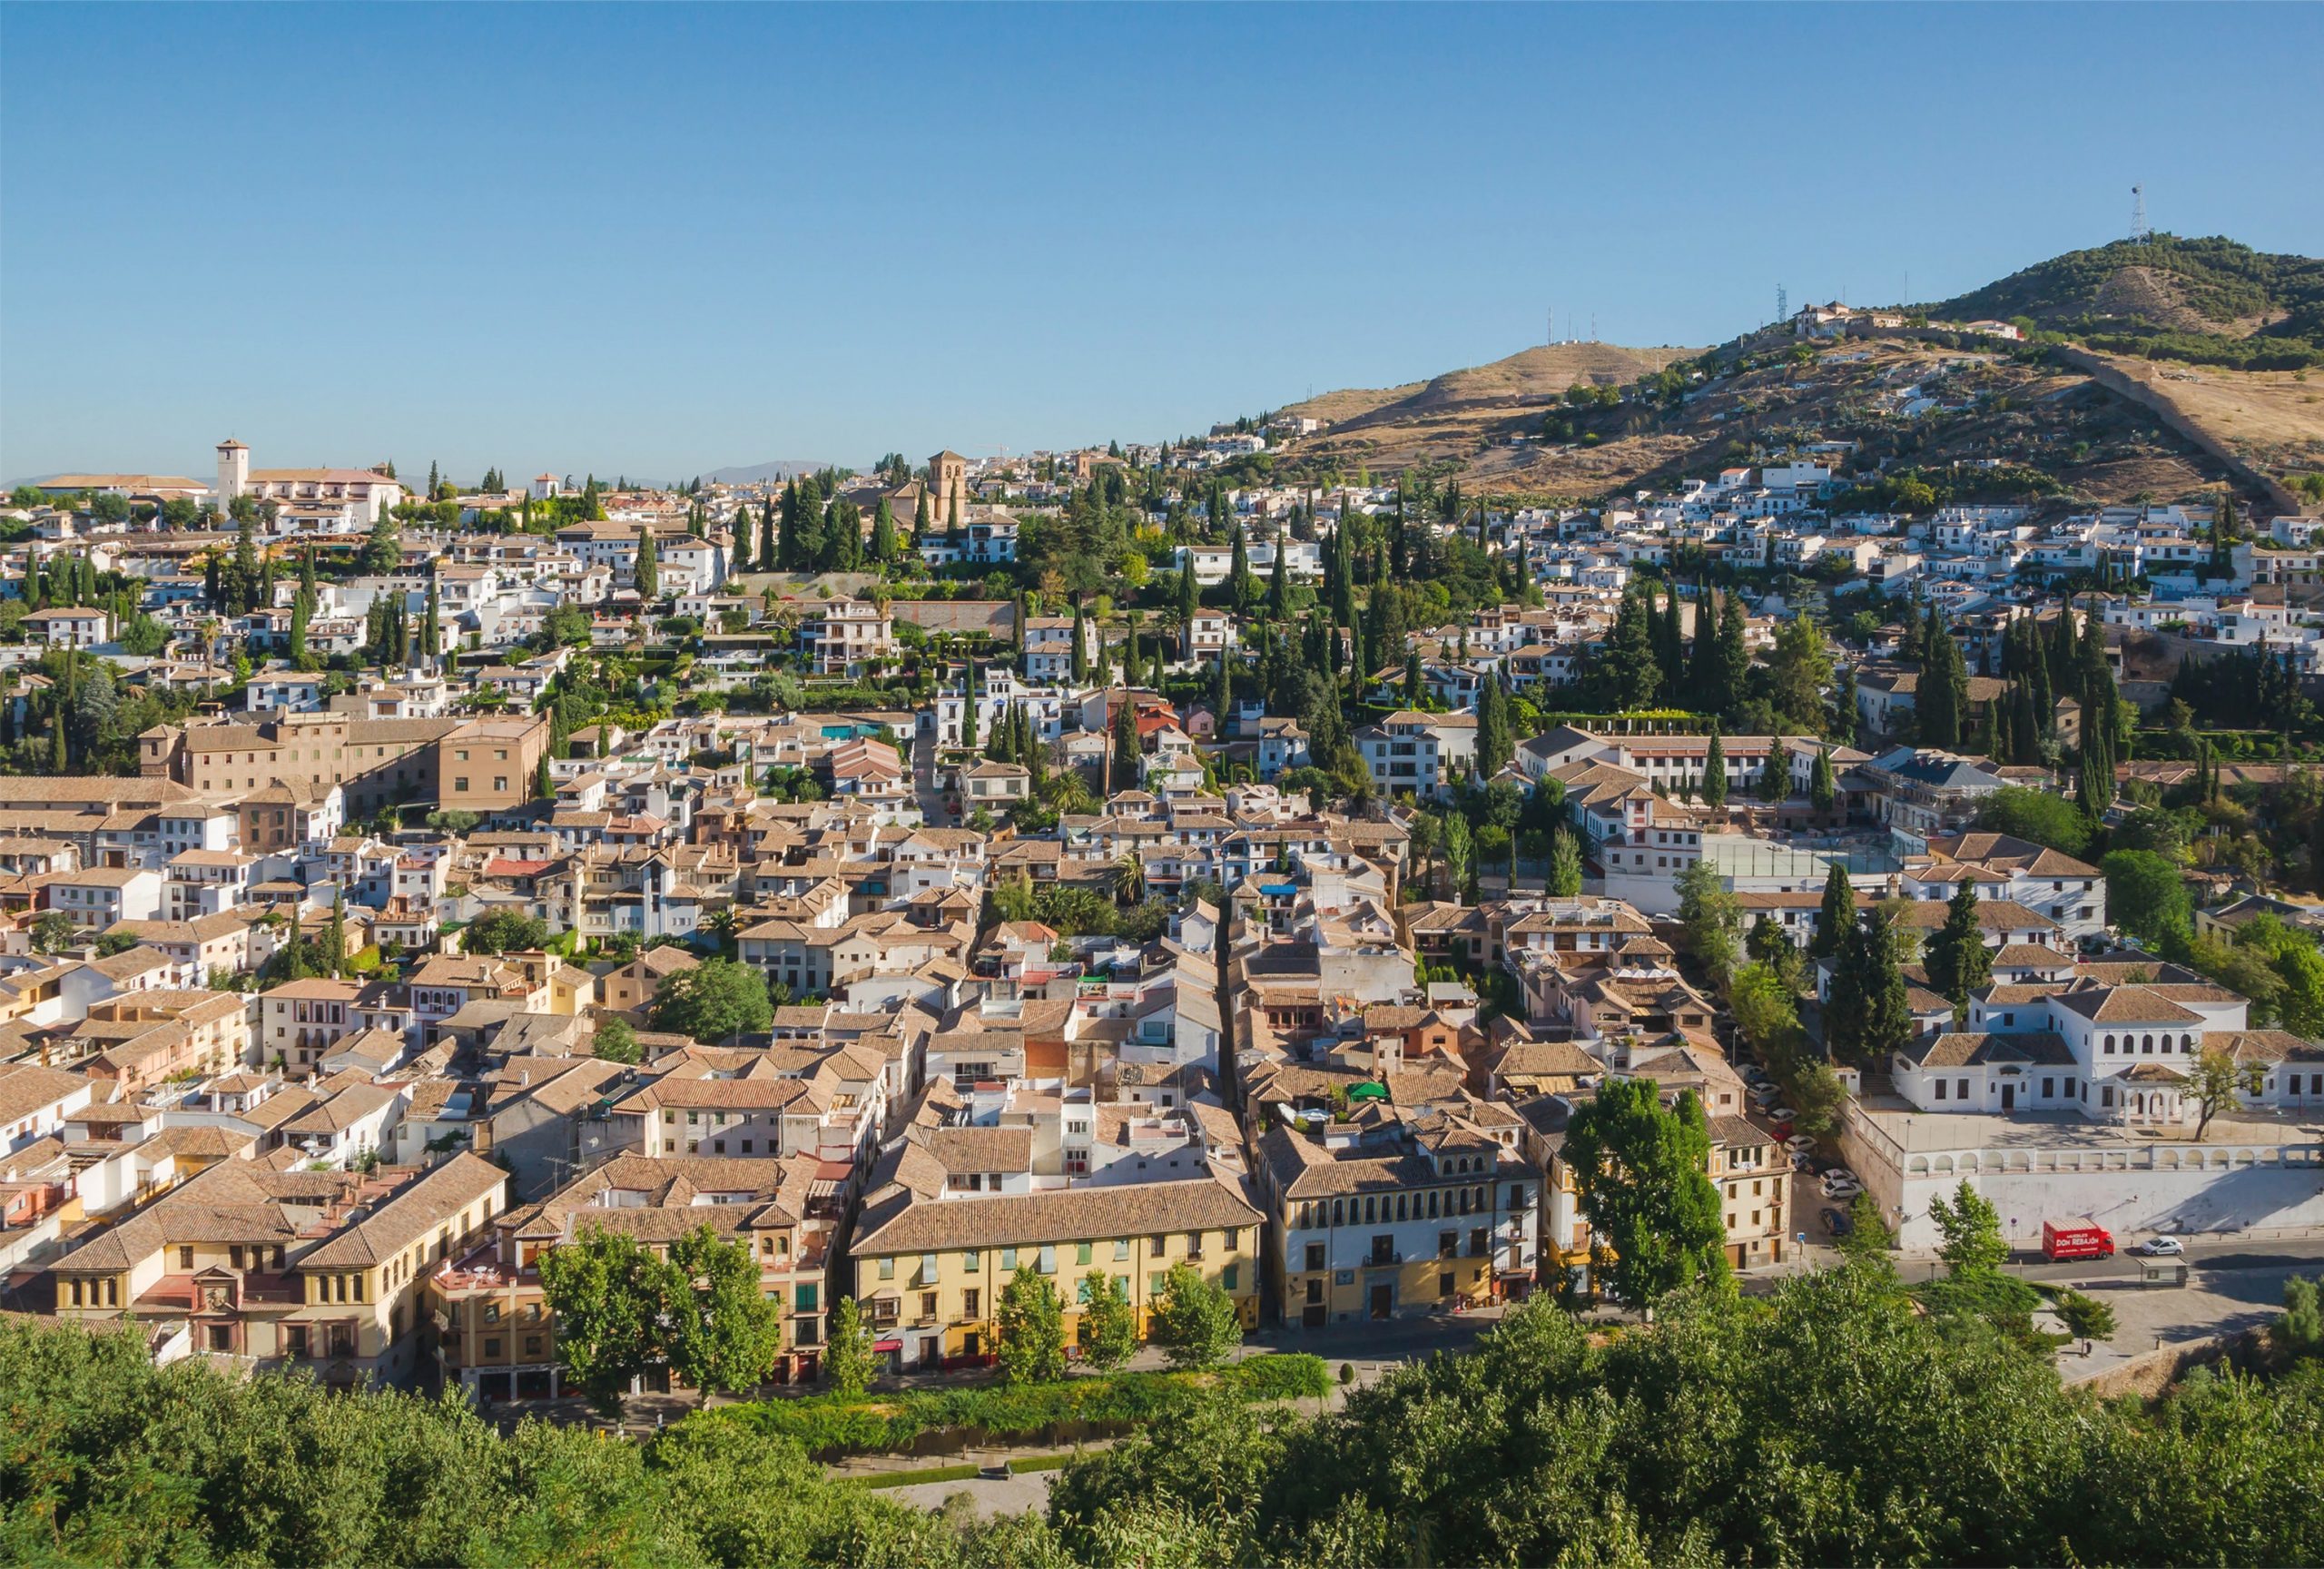 How to get to the best view points in Granada easily on a private tour